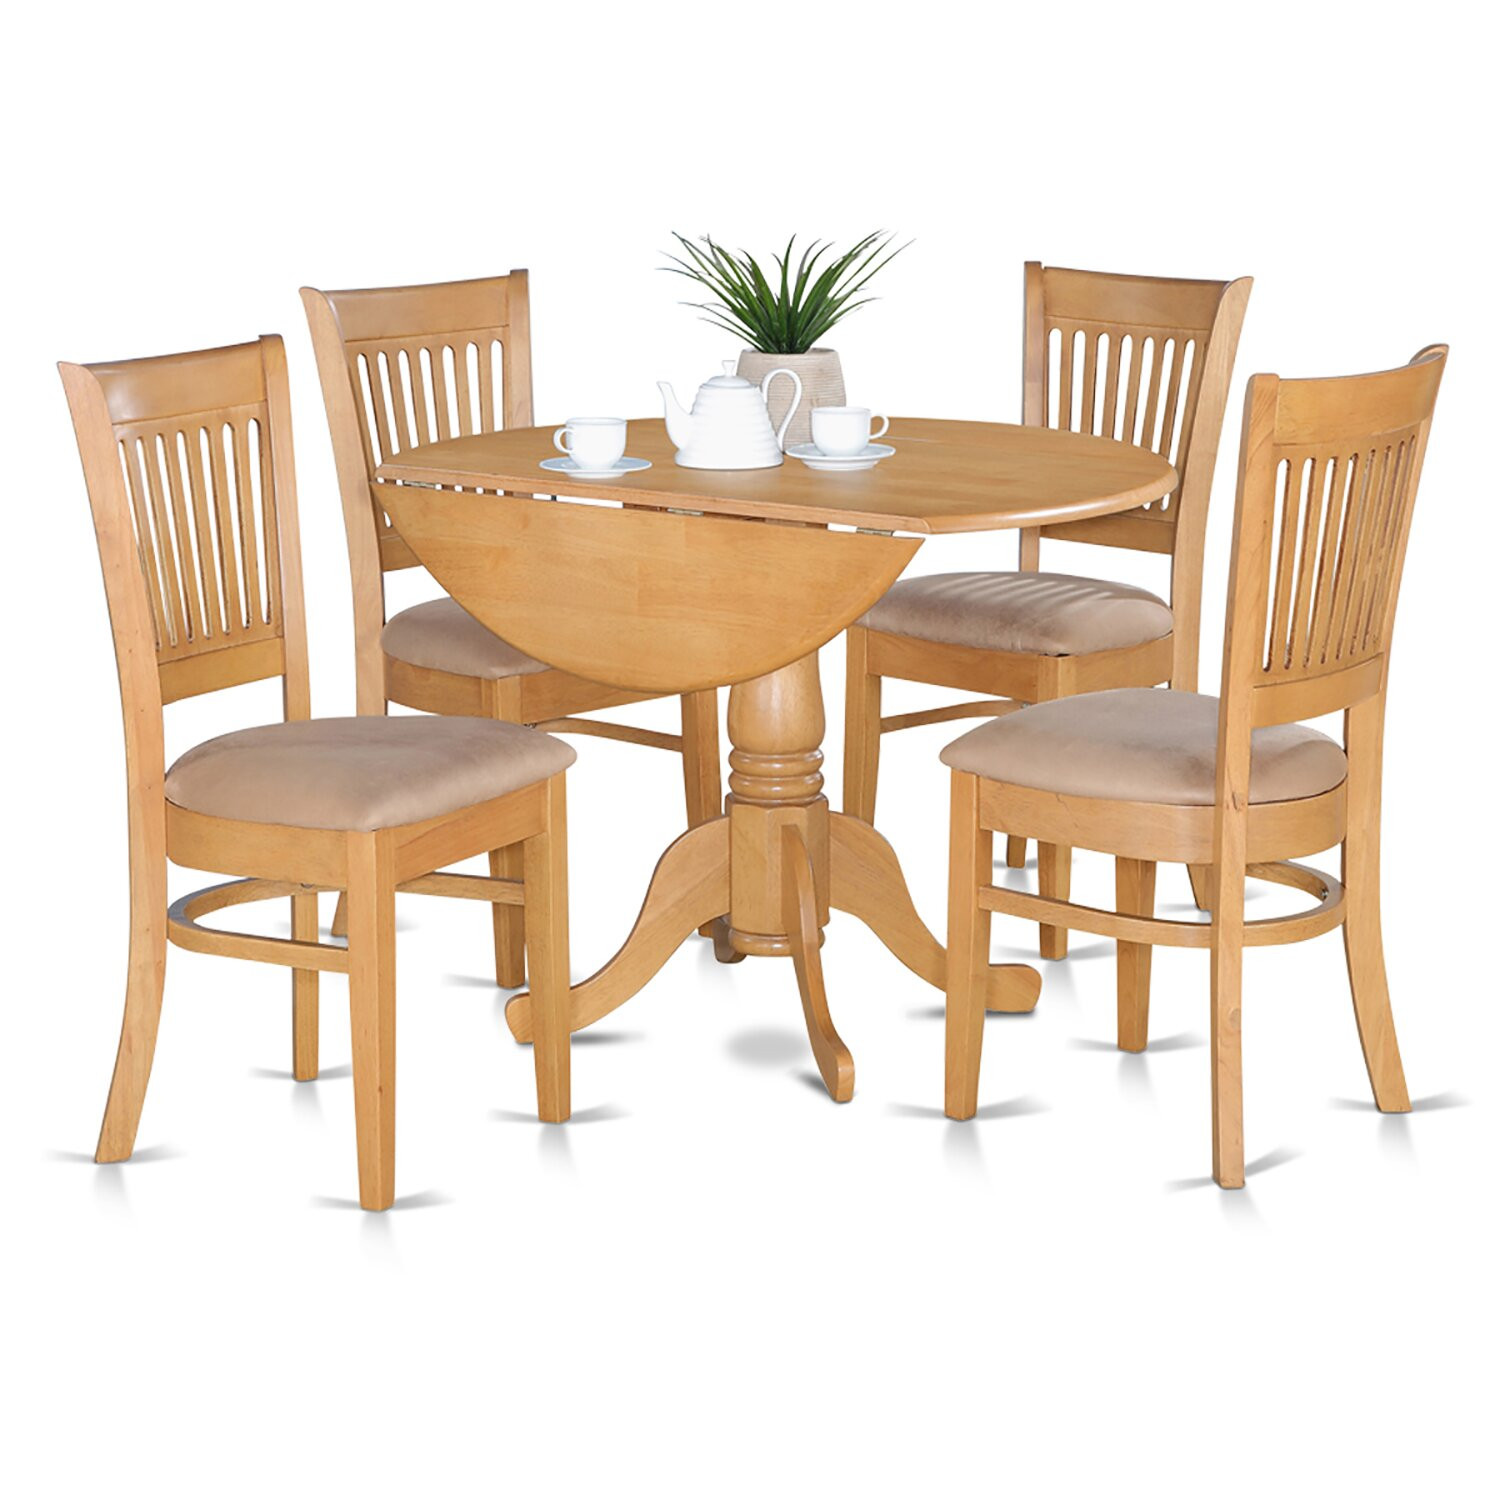 Small Kitchen Table For 4
 East West Dublin 5 Piece Dining Set & Reviews